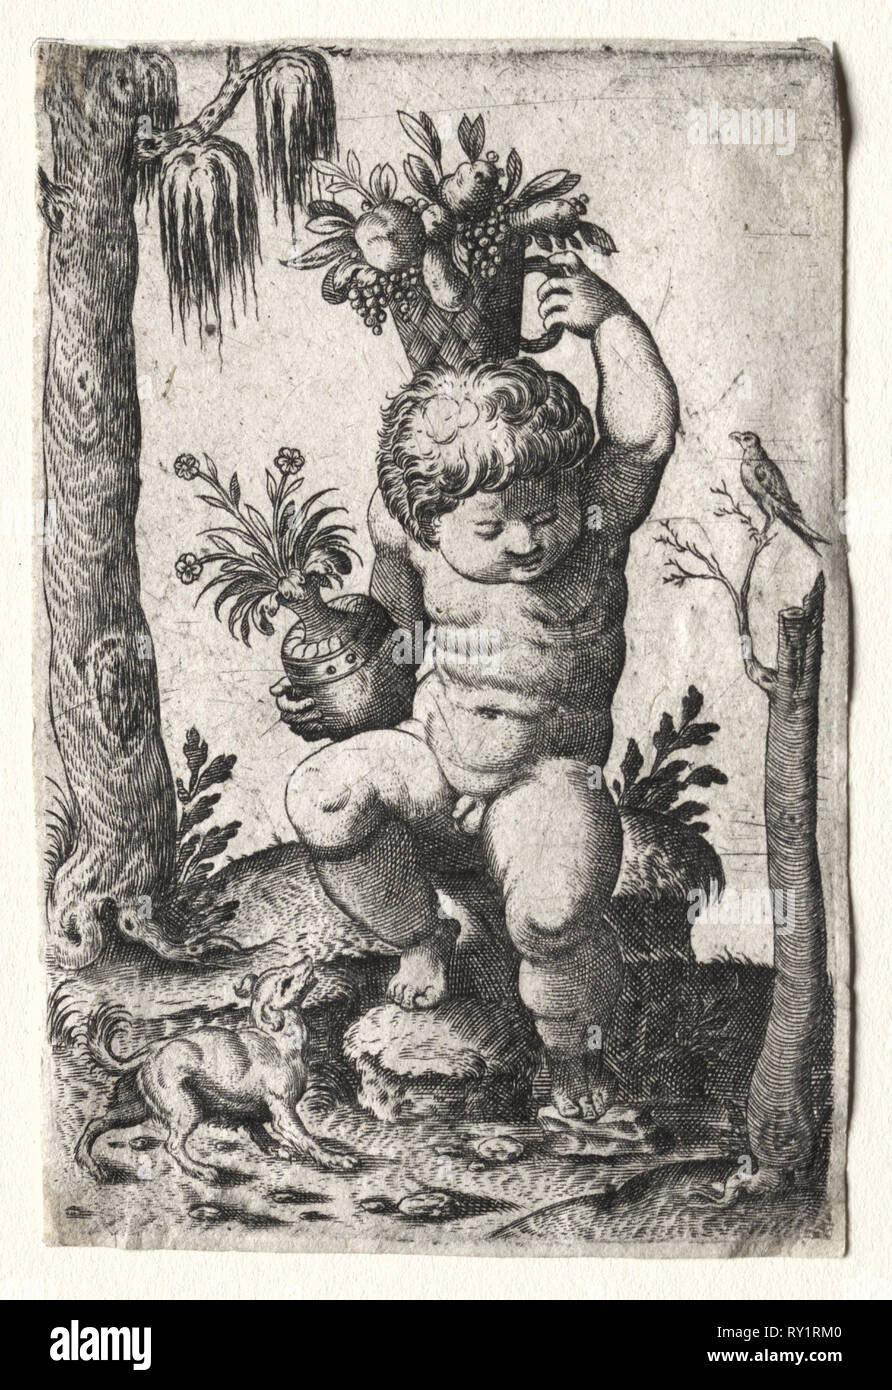 Boy with Fruit Basket, 1500s or 1600s. Italy, 16th or 17th century. Engraving Stock Photo